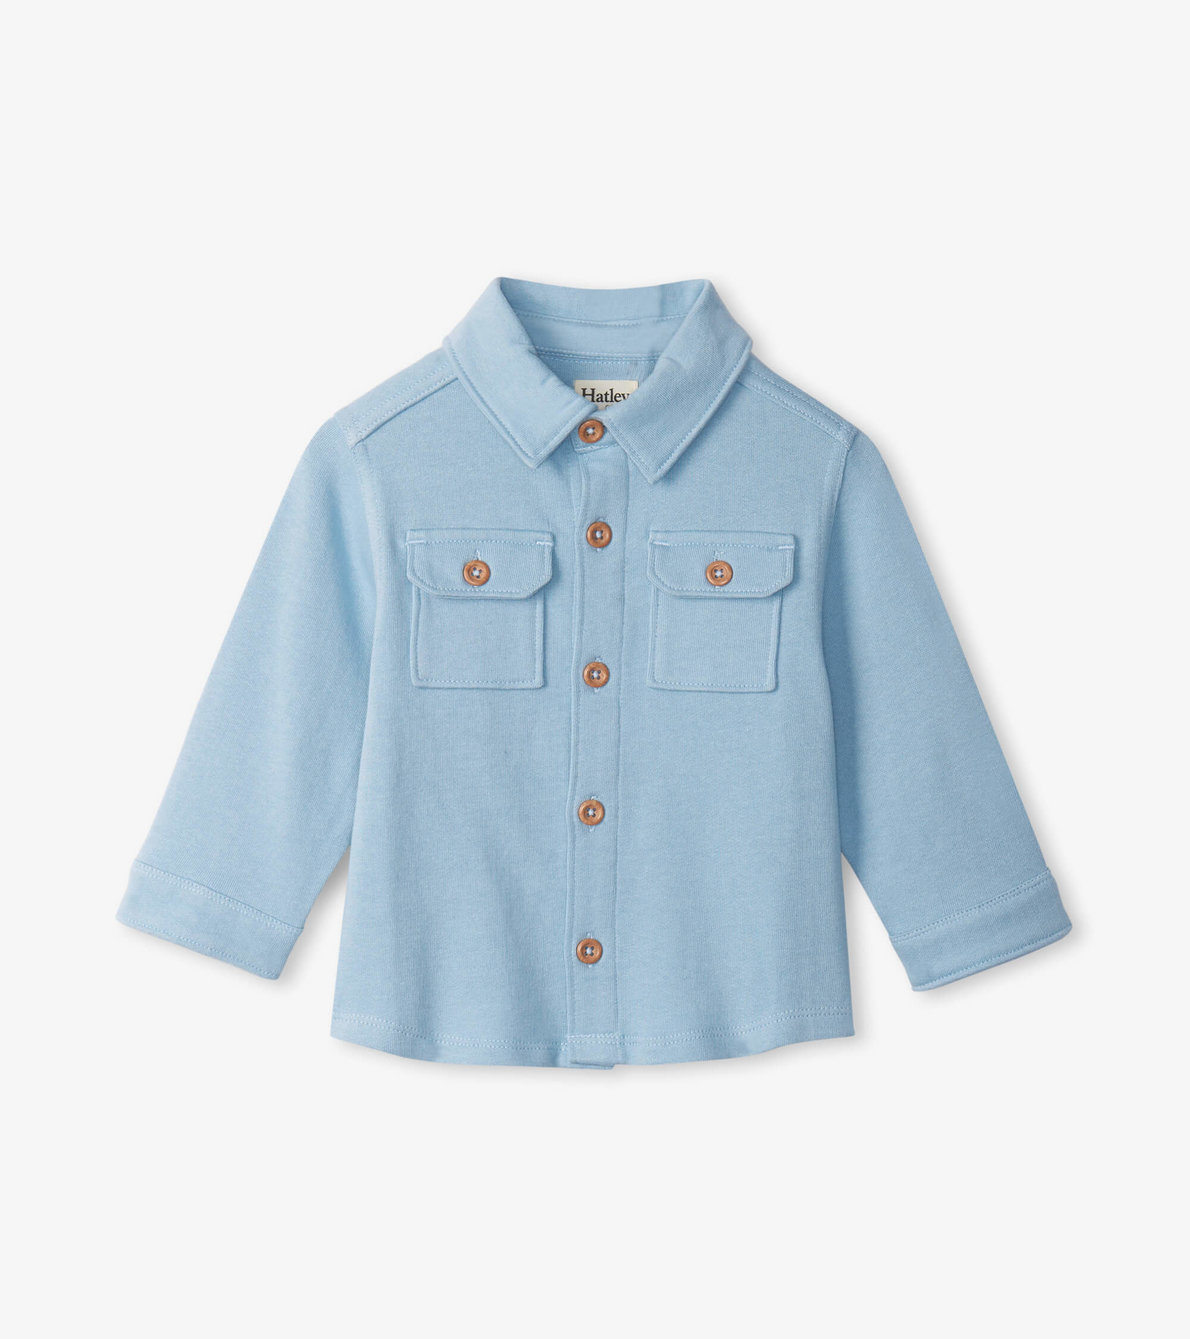 View larger image of Light Blue Baby Button Down Shirt